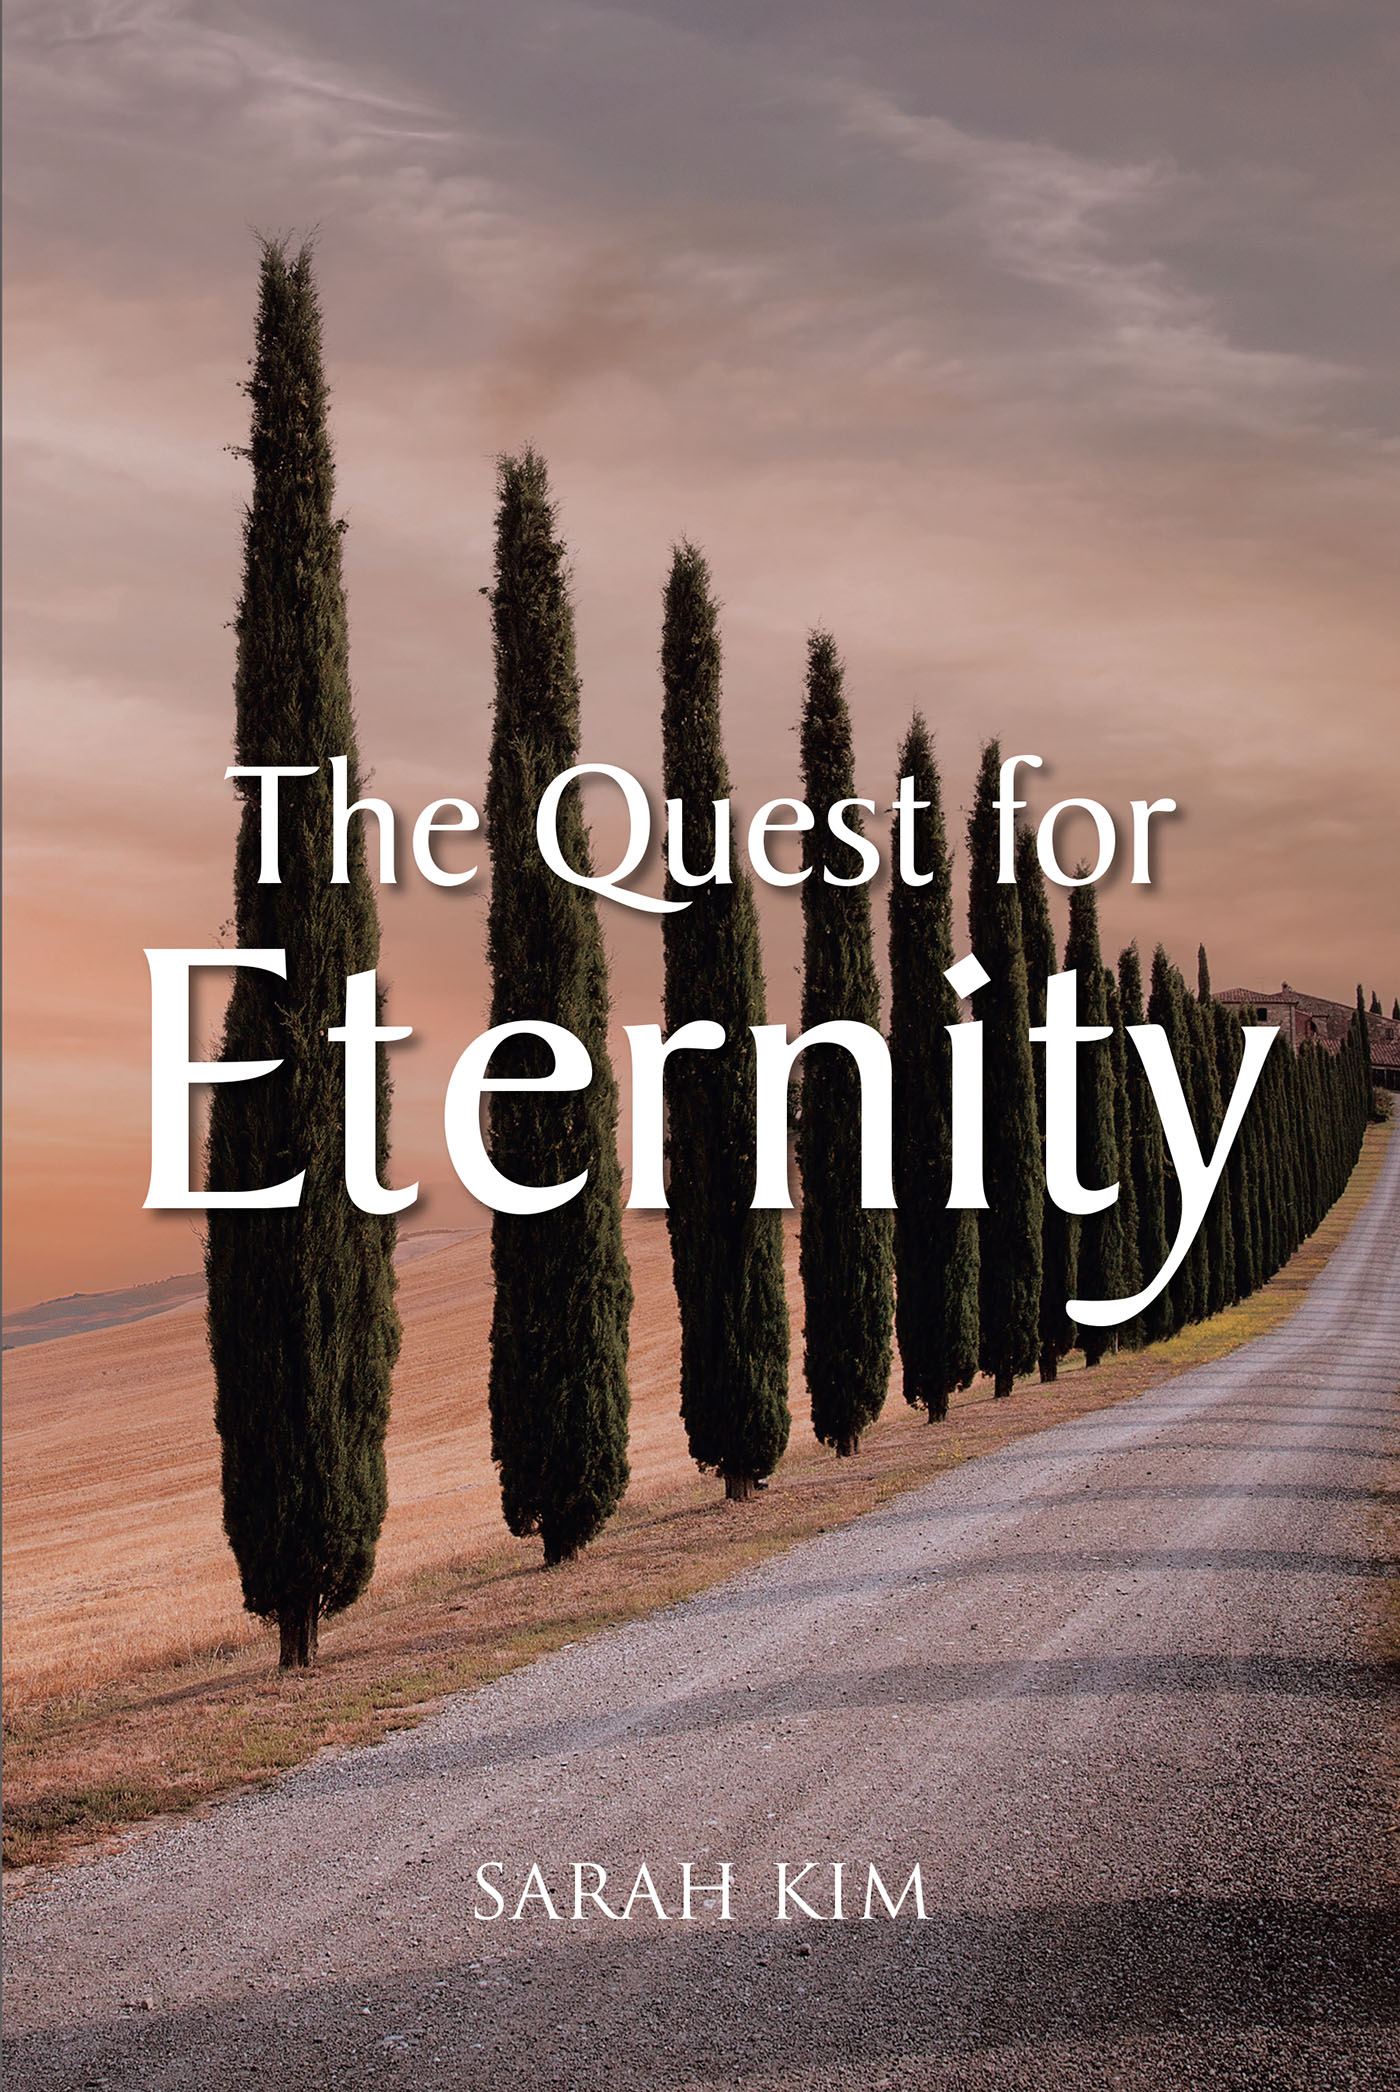 Sarah Kim's Newly Released "The Quest for Eternity" is an Articulate Discussion of What Comes Next After the Inevitability of Death